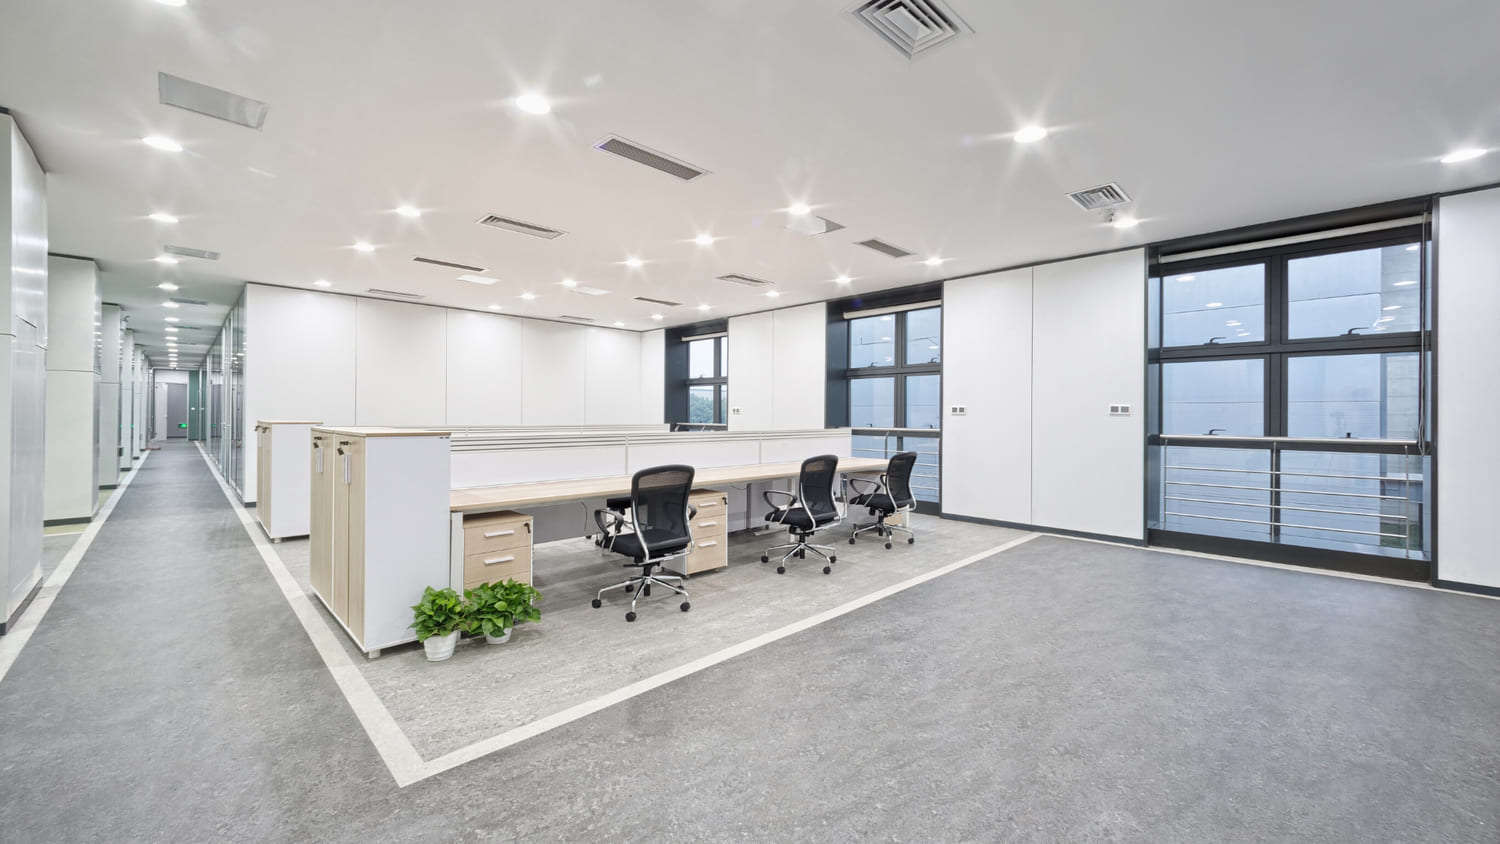 A very modern office space with concrete floors